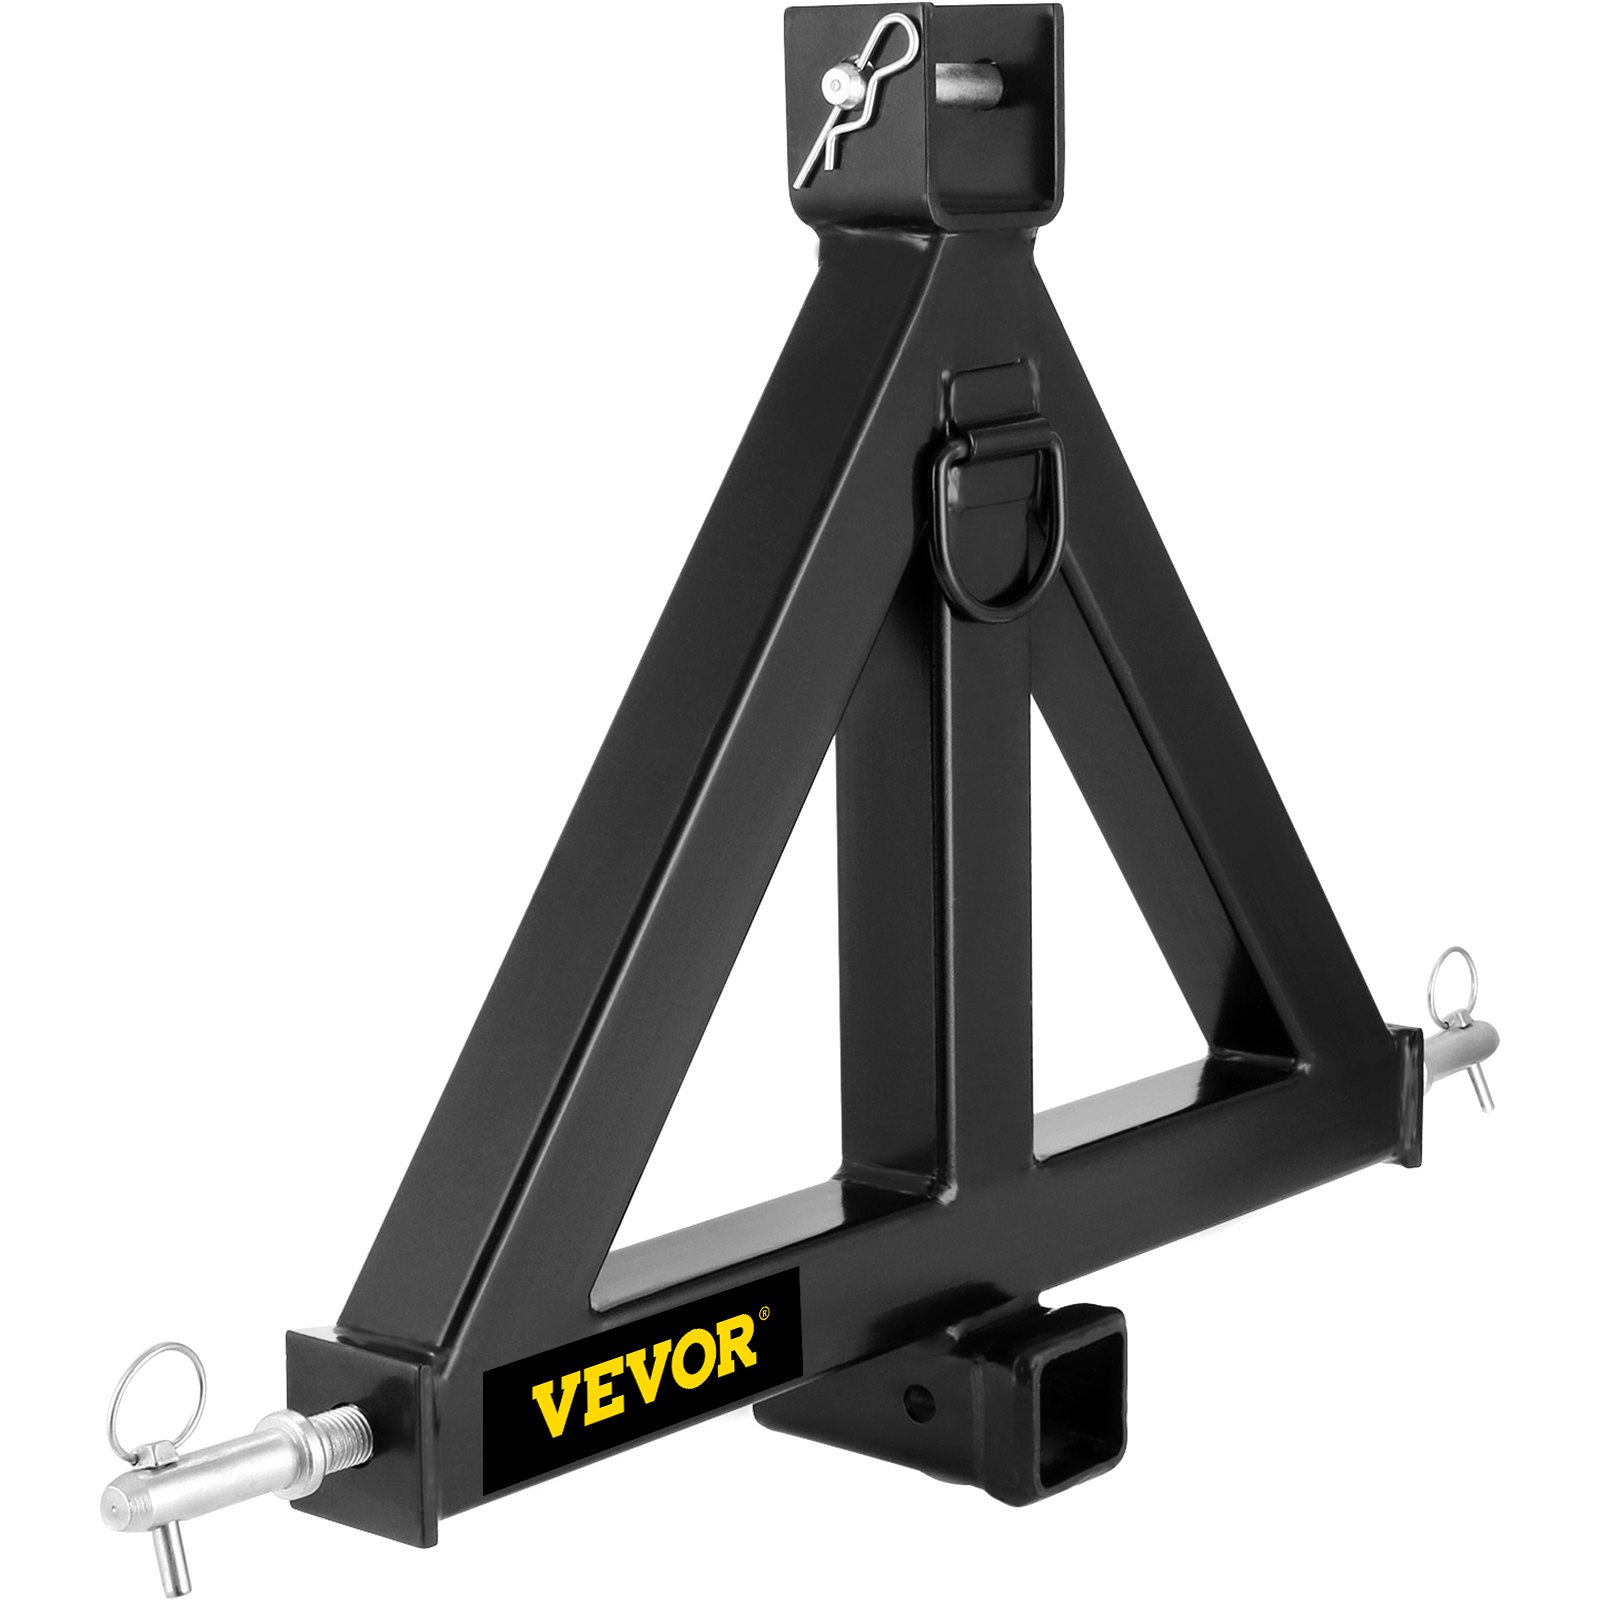 VEVOR 3 Point Trailer Hitch Heavy Duty 2In Receiver Hitch Category 1 ...